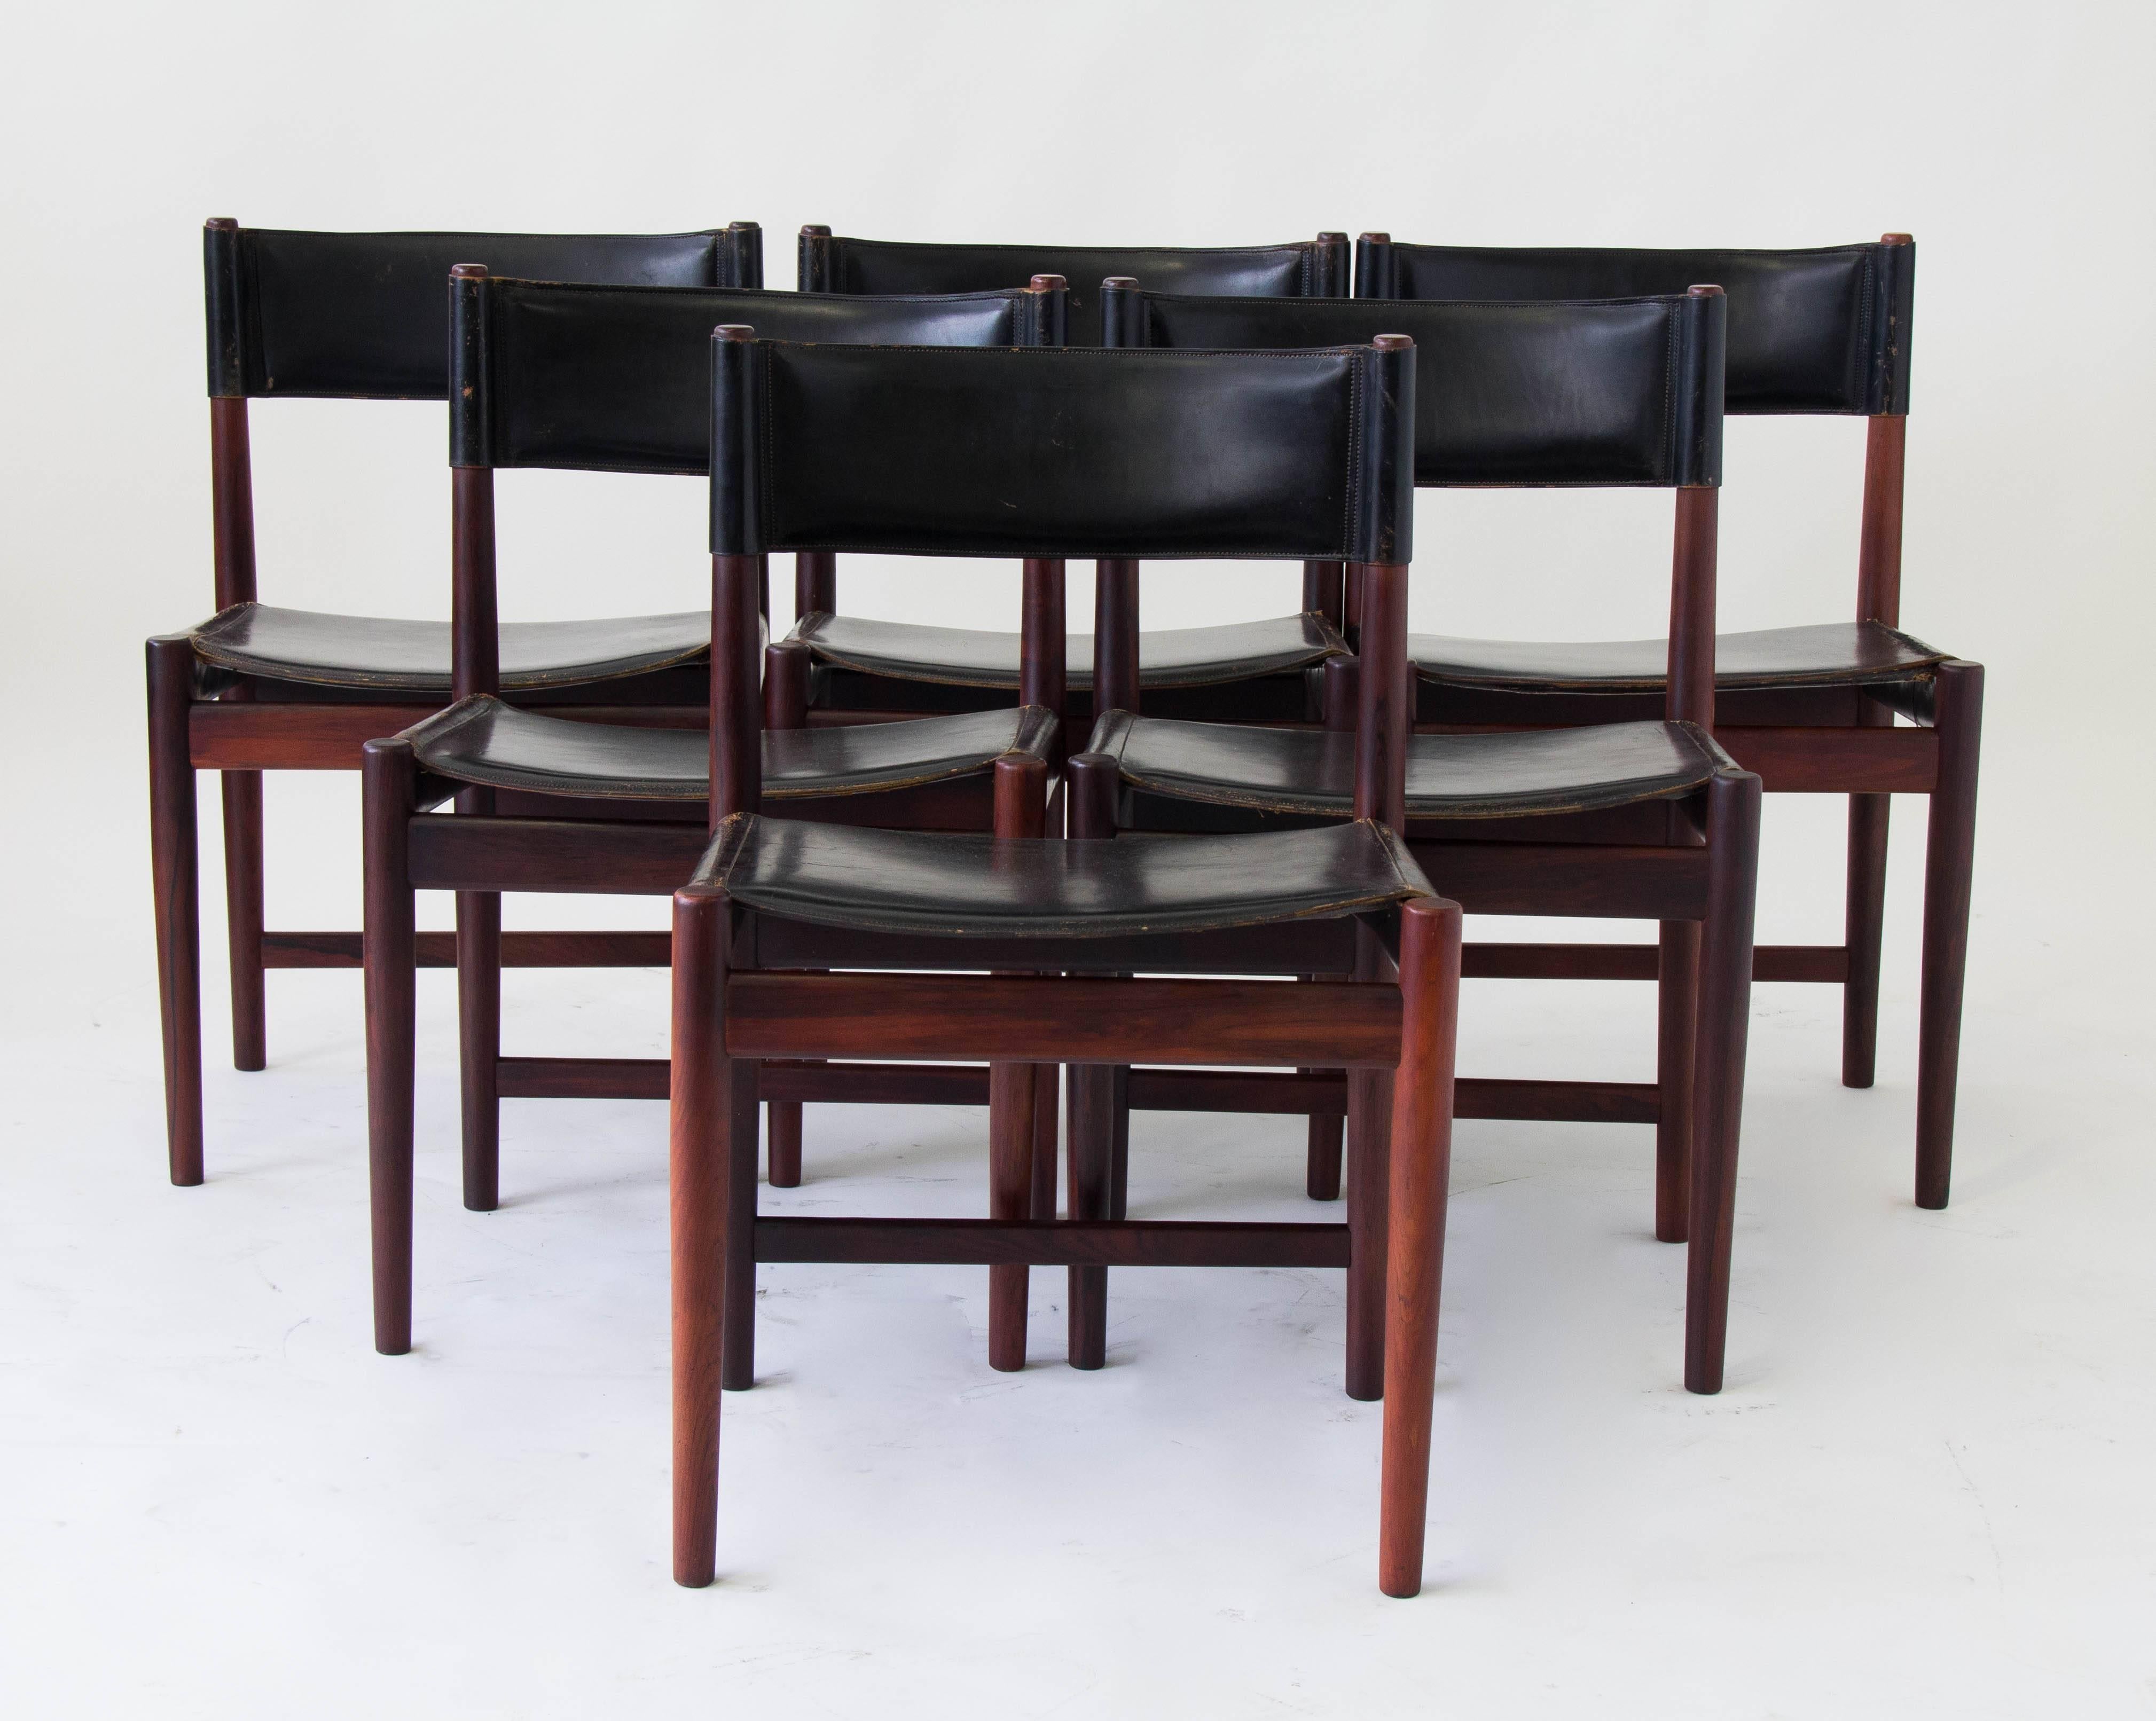 Six rosewood dining chairs designed by Kurt Østervig and produced by Sibast furniture. Each chair has a straight back and tapered dowel legs. The frame is wrapped in black saddle leather to form the backrest and seat cushion. Sibast manufacturer’s